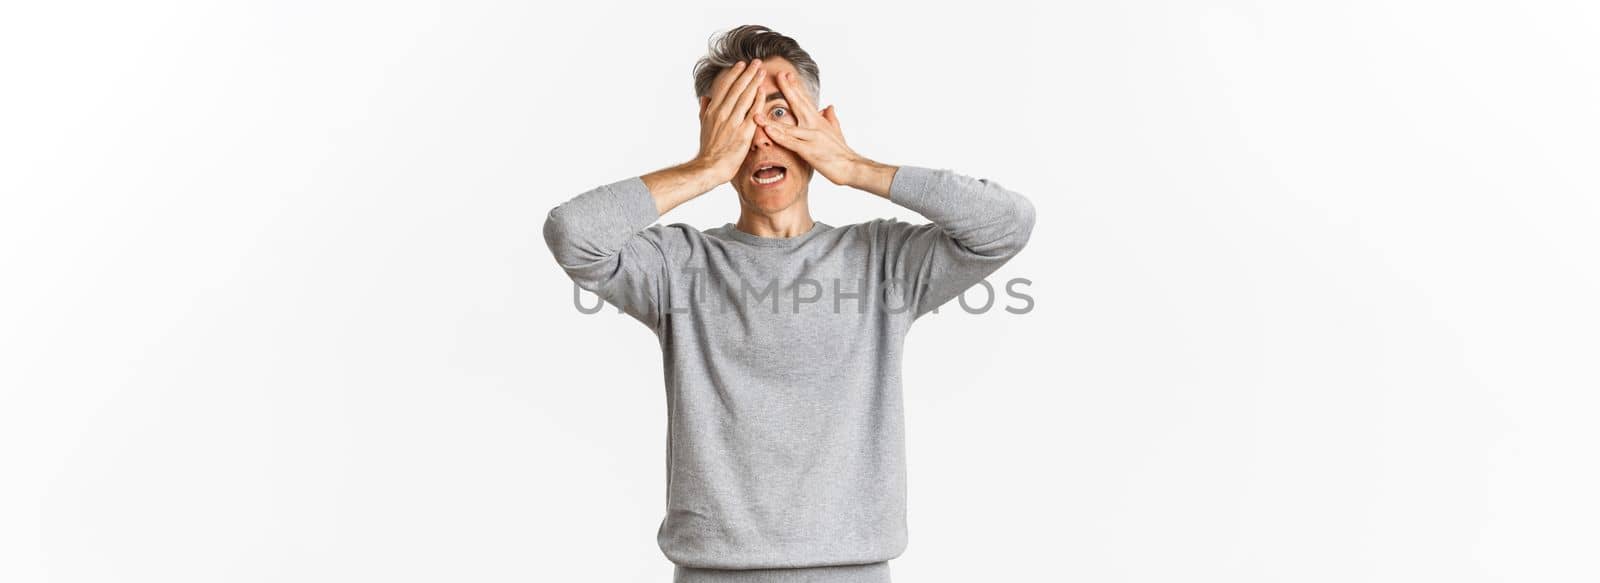 Image of embarrassed of scared middle-aged man cover his eyes with hands, peeking through fingers with shocked expression, standing over white background.